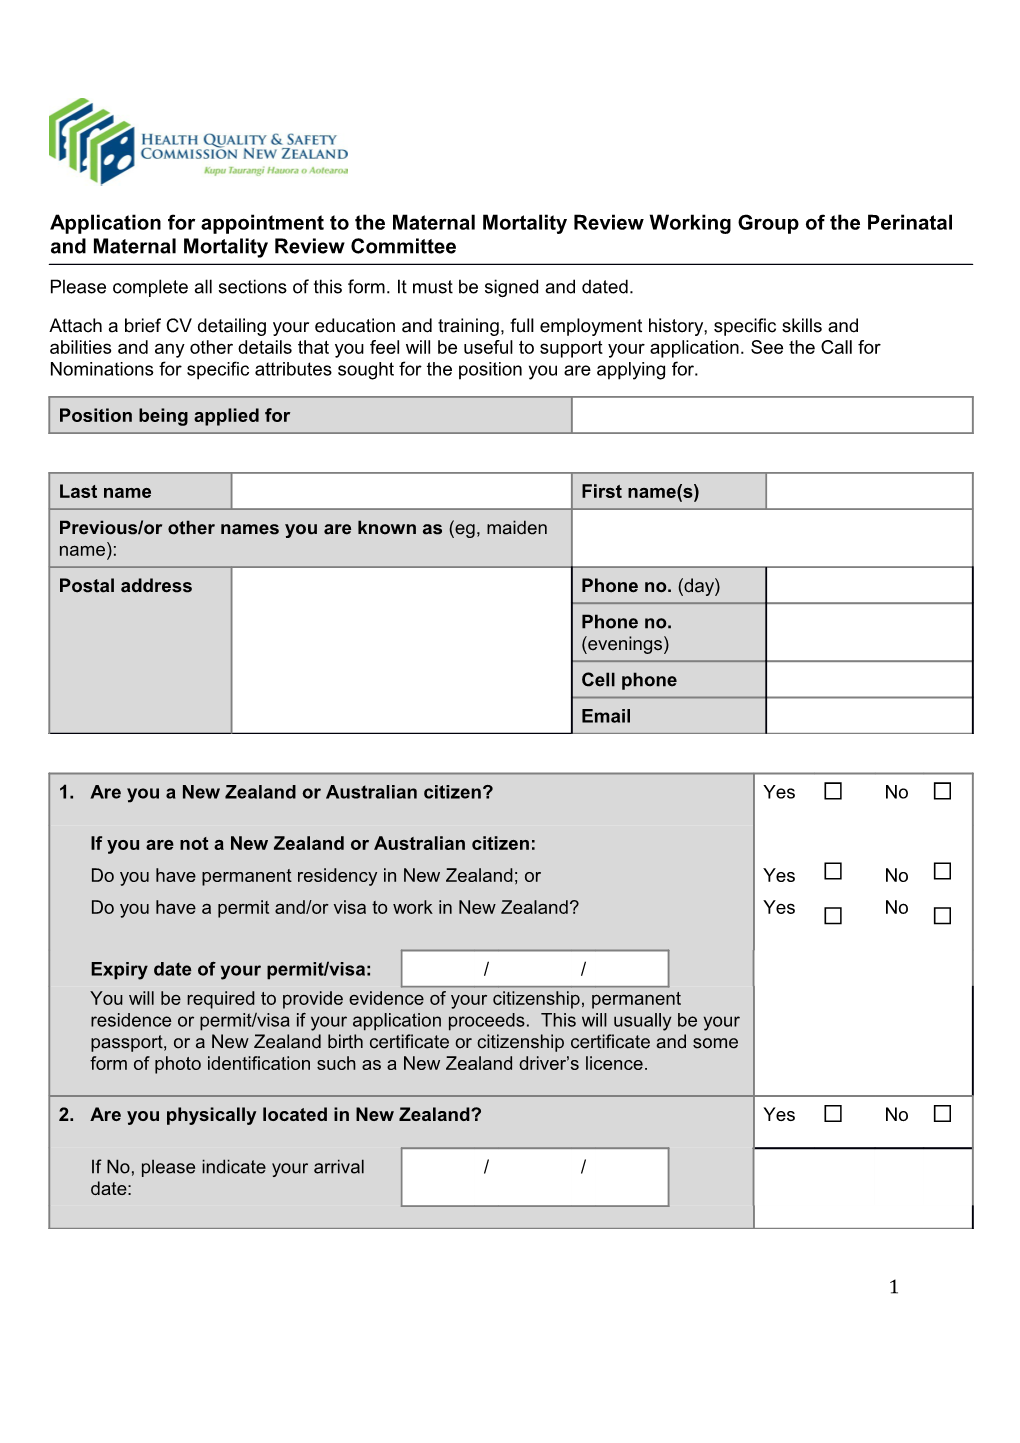 Please Complete All Sections of This Form. It Must Be Signed and Dated